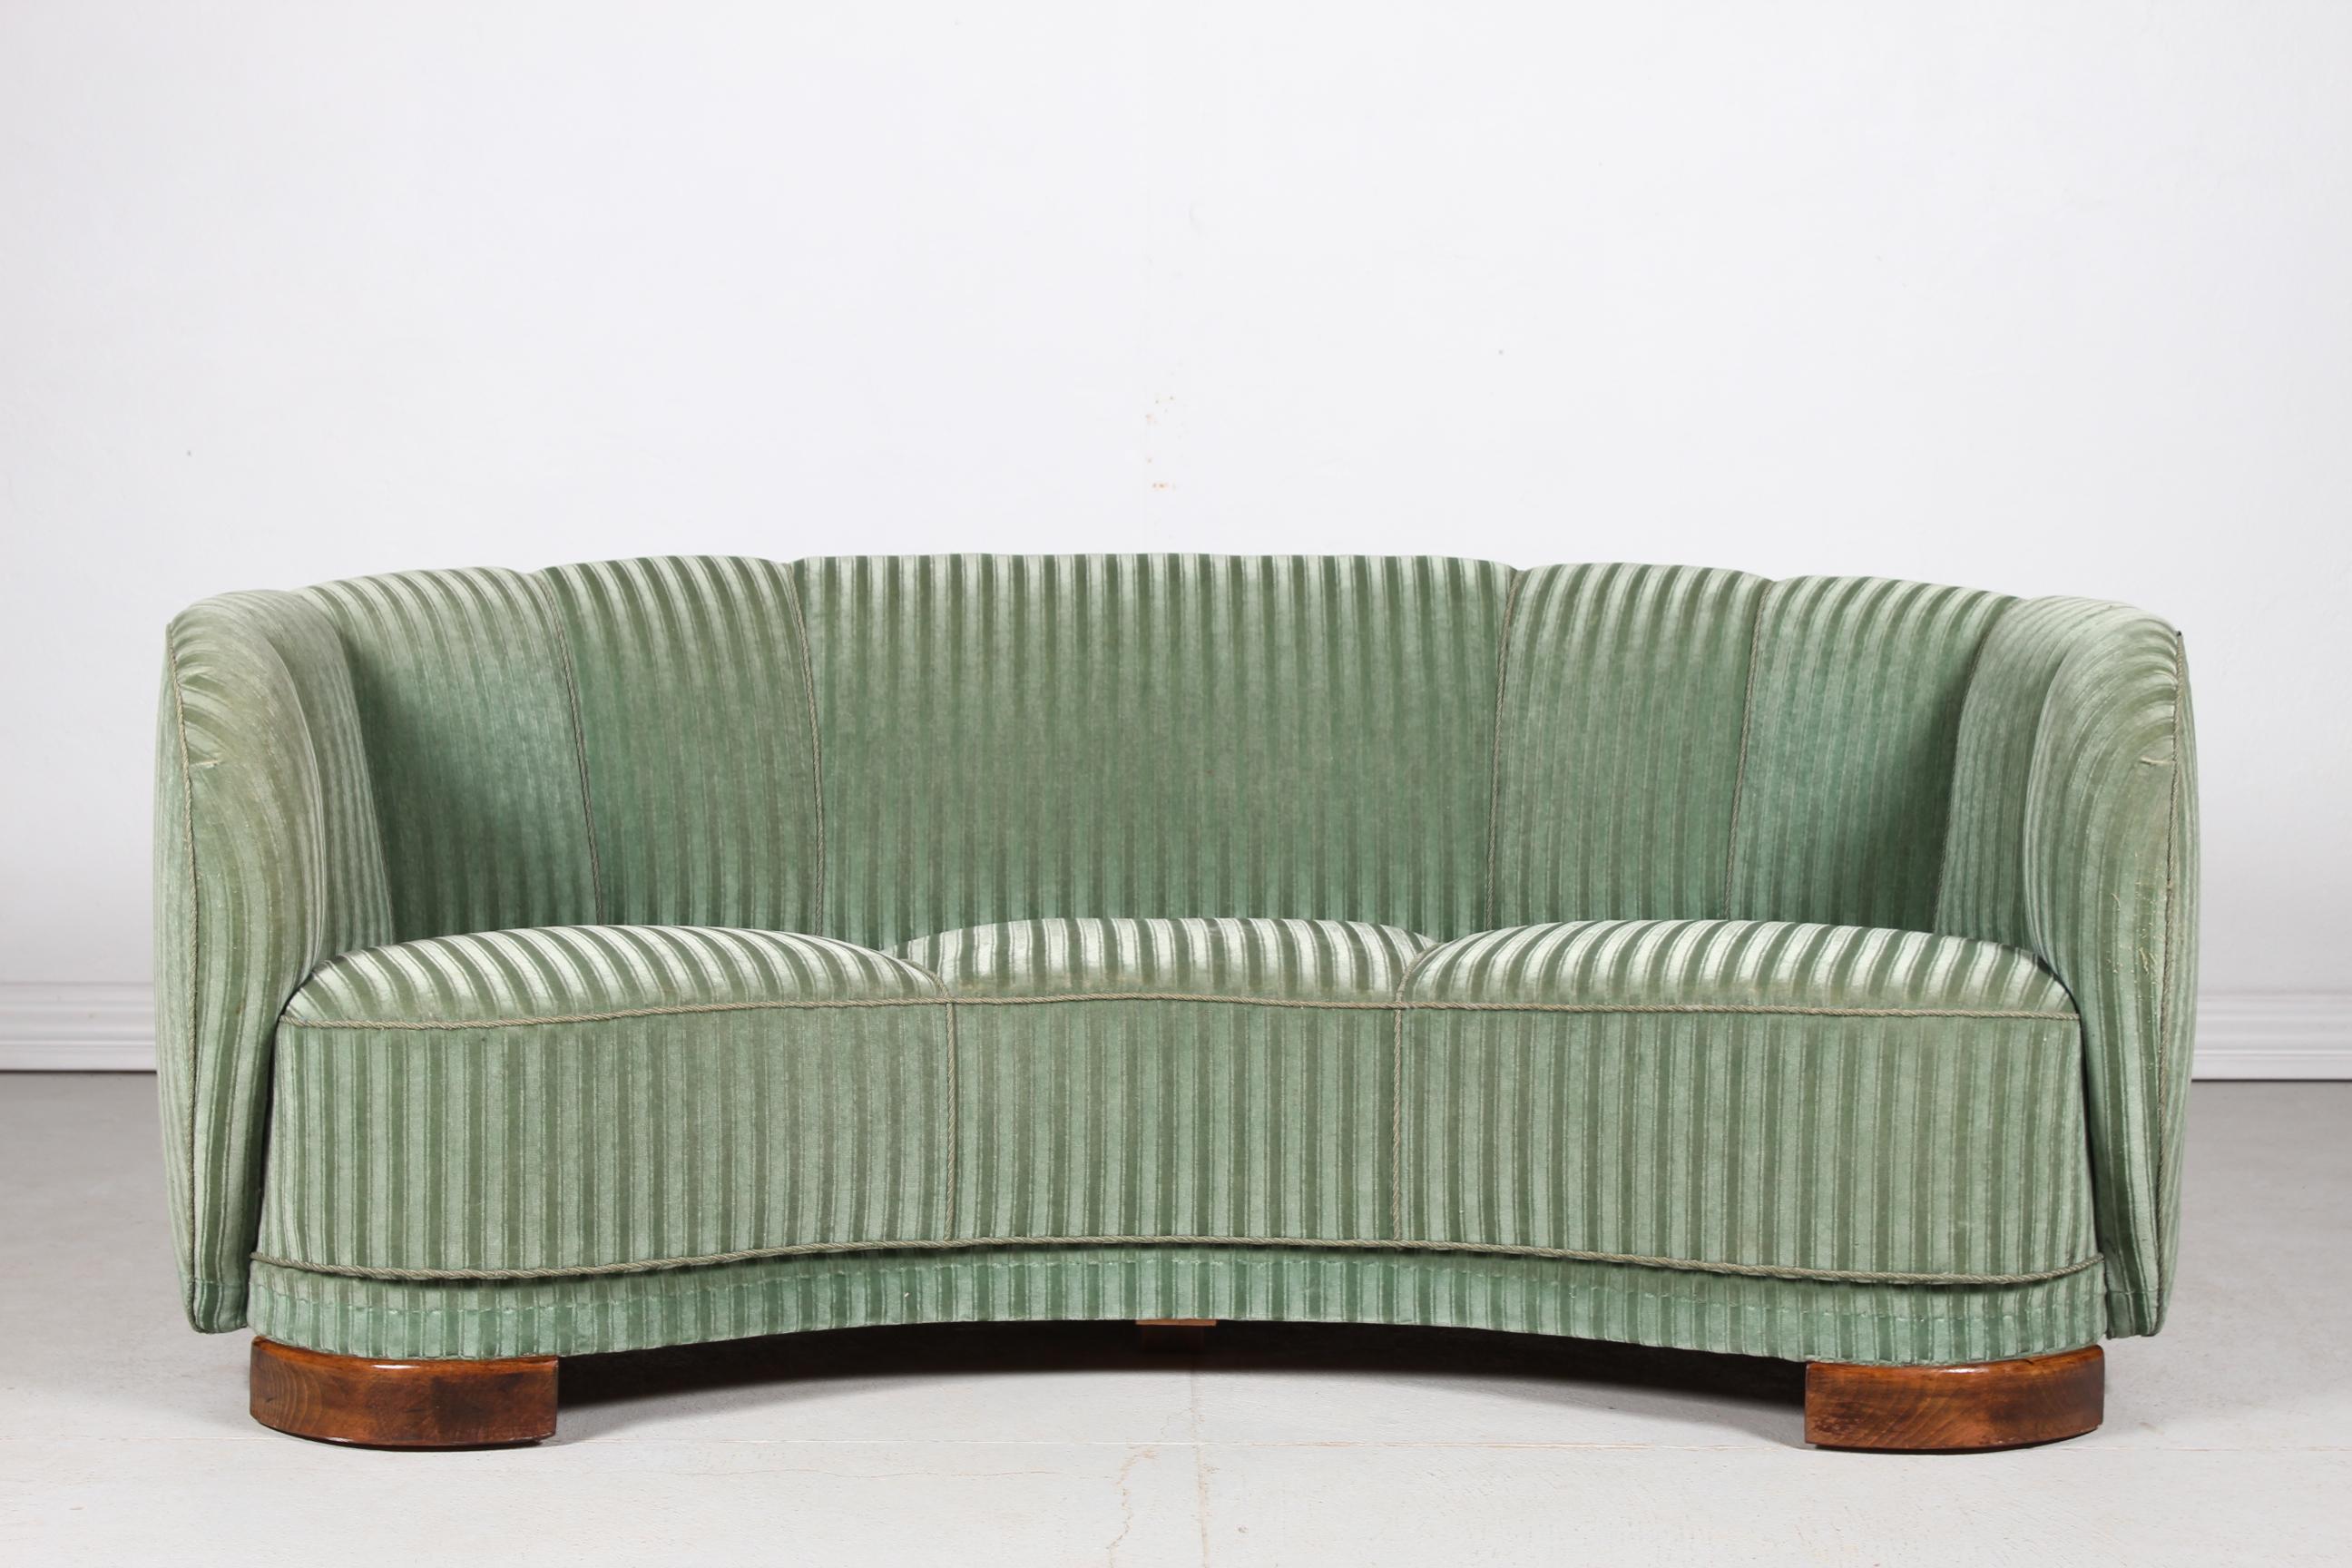 Danish curved, banana shaped Art Deco couch or sofa made in the 1940s.
The legs are made of dark stained wood and the sofa is upholstered with green striped velour.
Made by Danish furniture maker in the 1940s. 

The couch is in good vintage